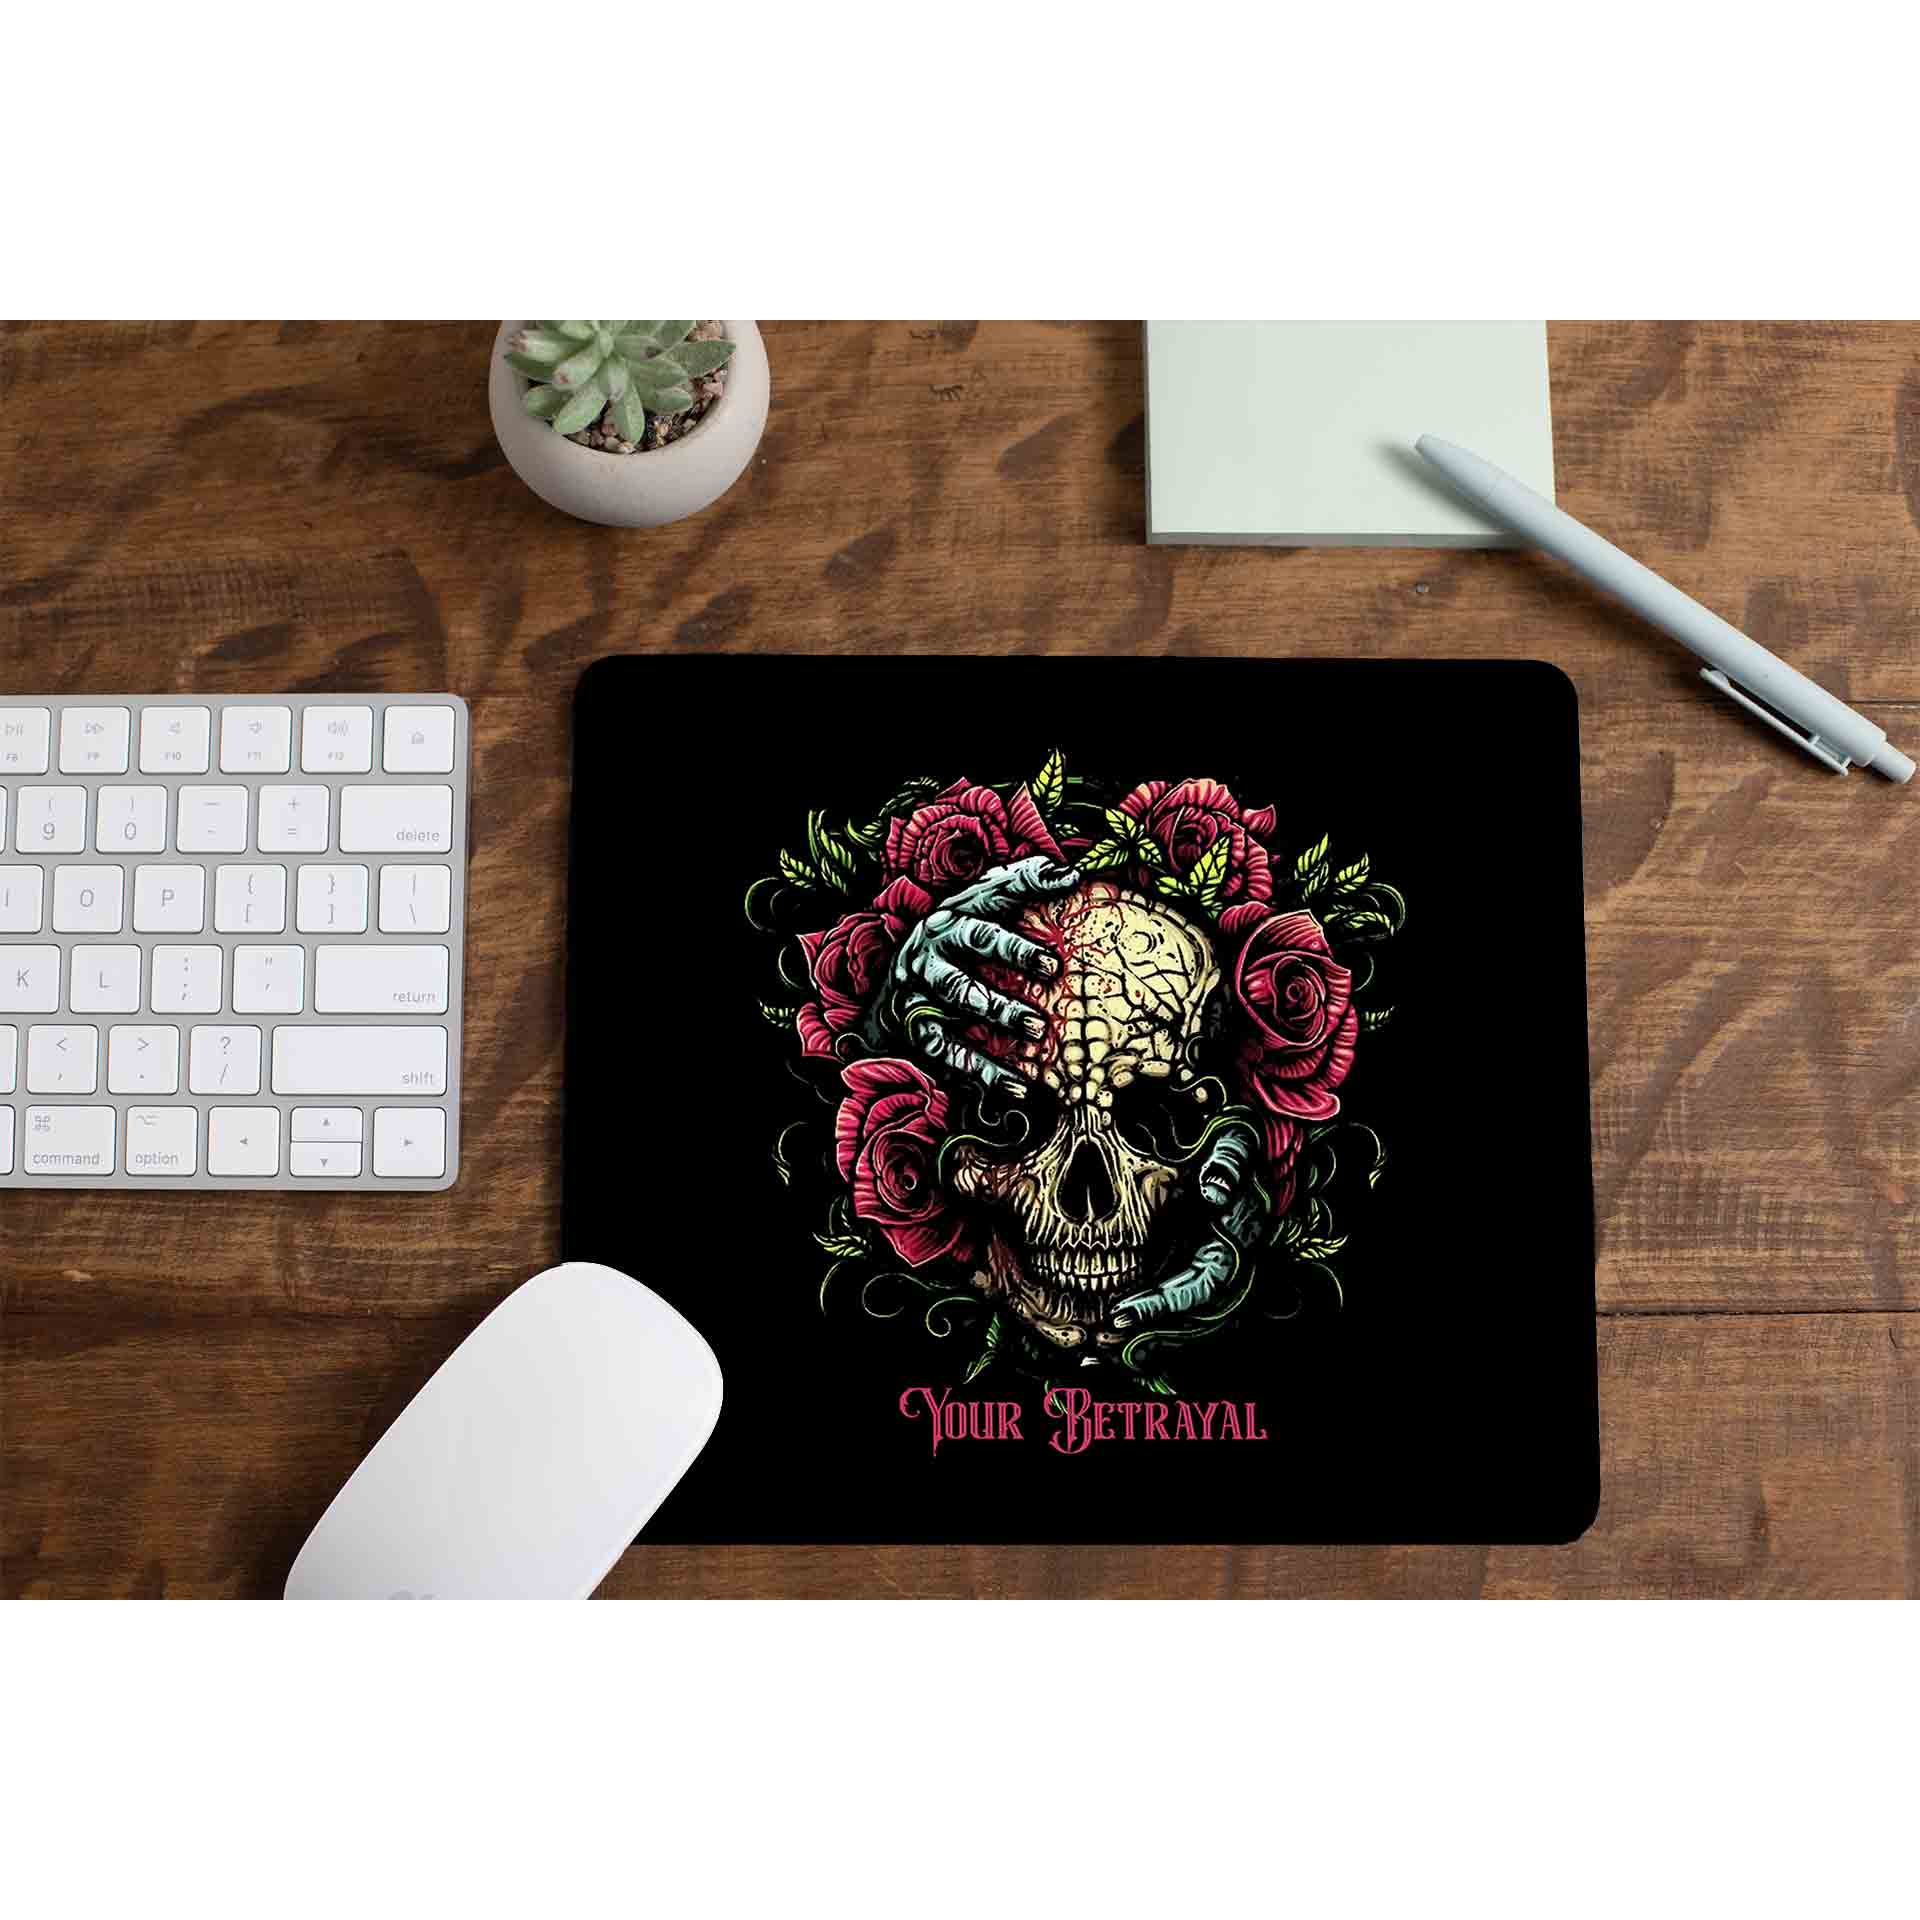 bullet for my valentine your betrayal mousepad logitech large anime music band buy online india the banyan tee tbt men women girls boys unisex